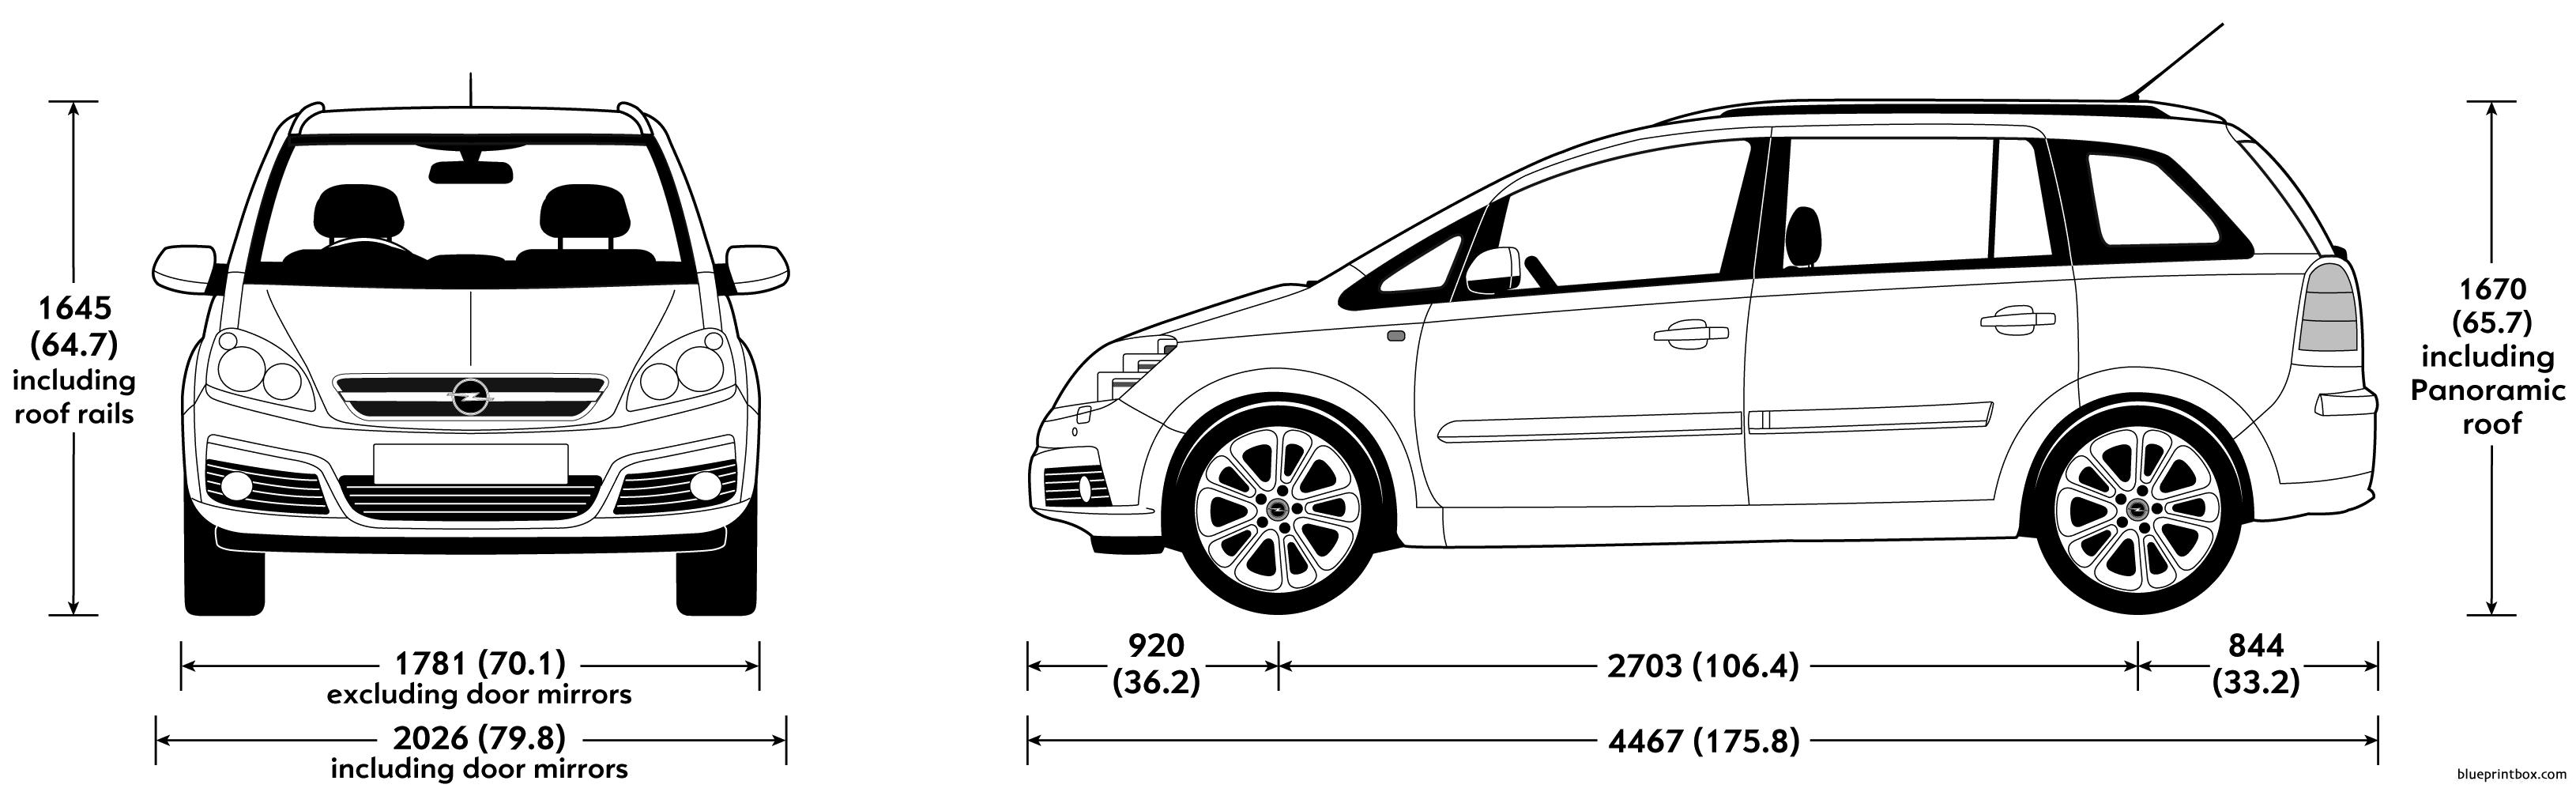 opel zafira 2007 - BlueprintBox.com - Free Plans and Blueprints of Cars